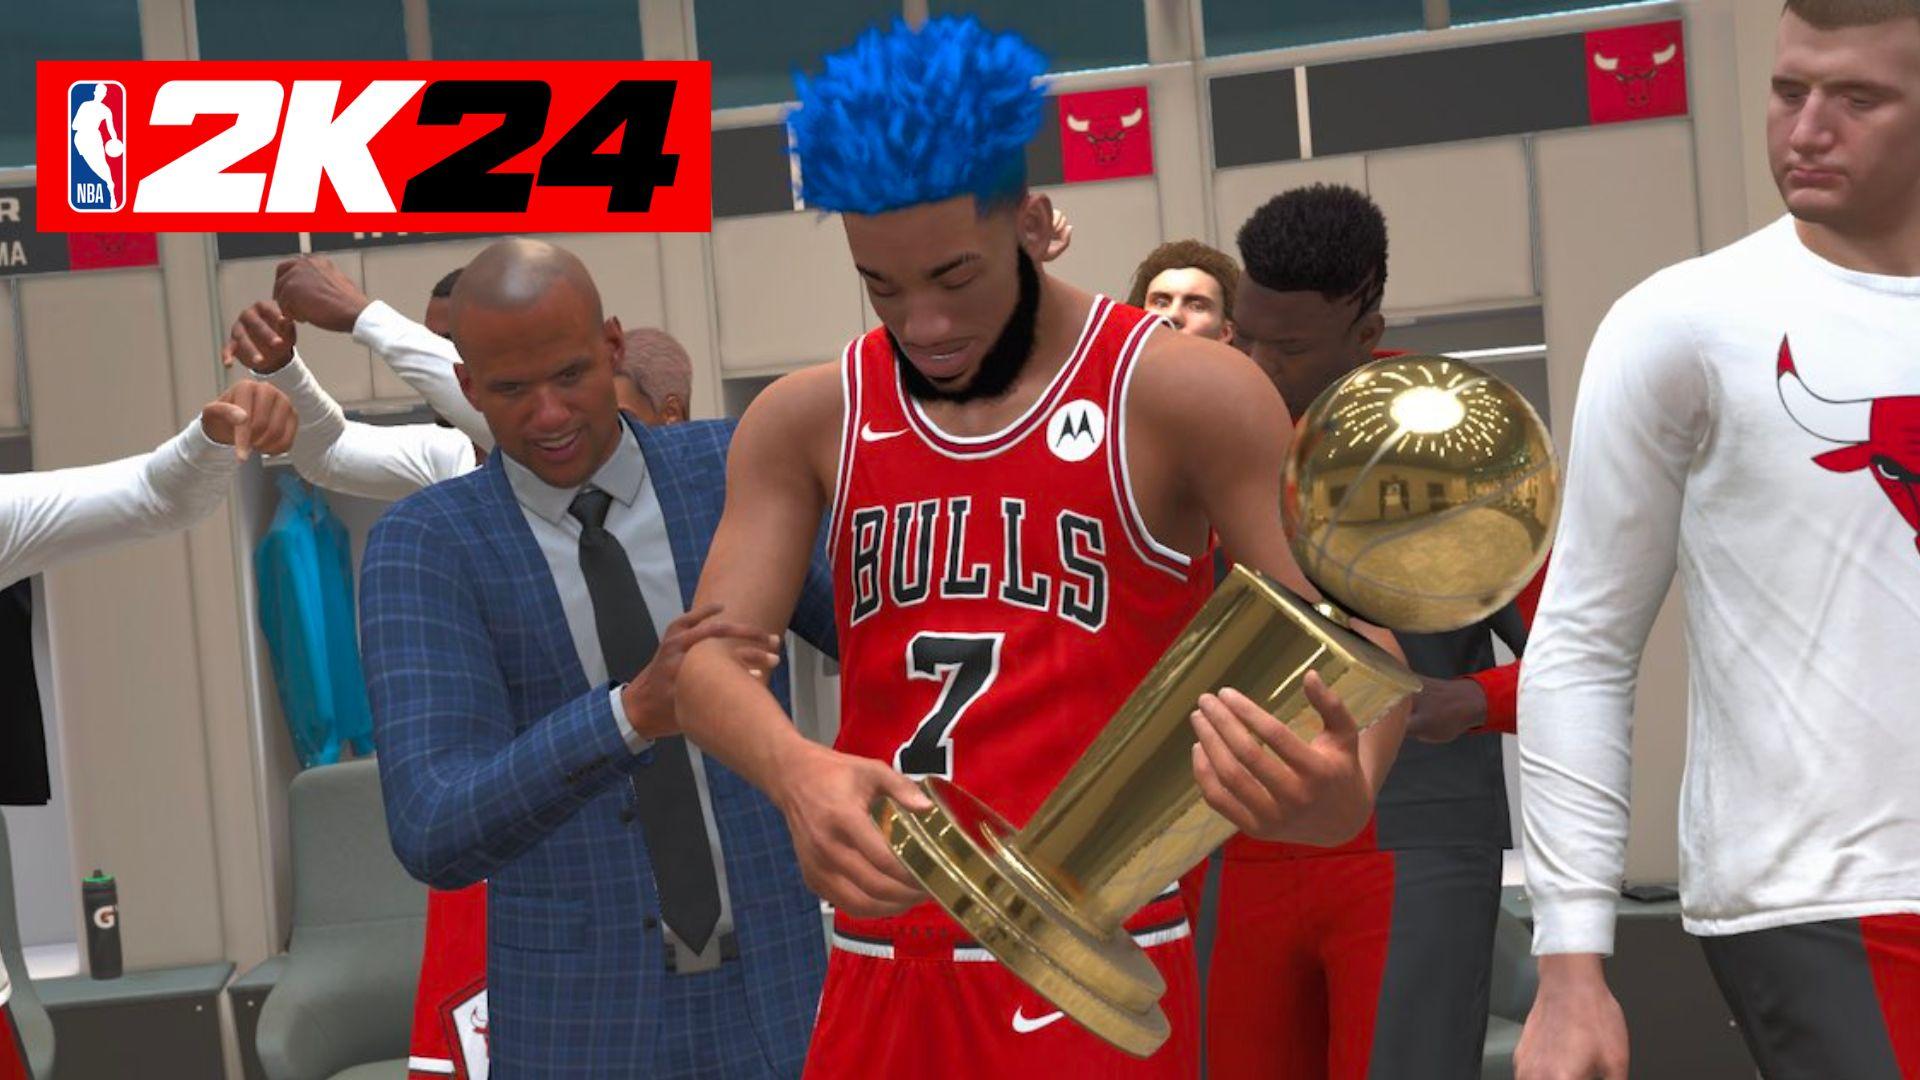 NBA 2K24 players in red Chicago Bulls jersey with championship trophy